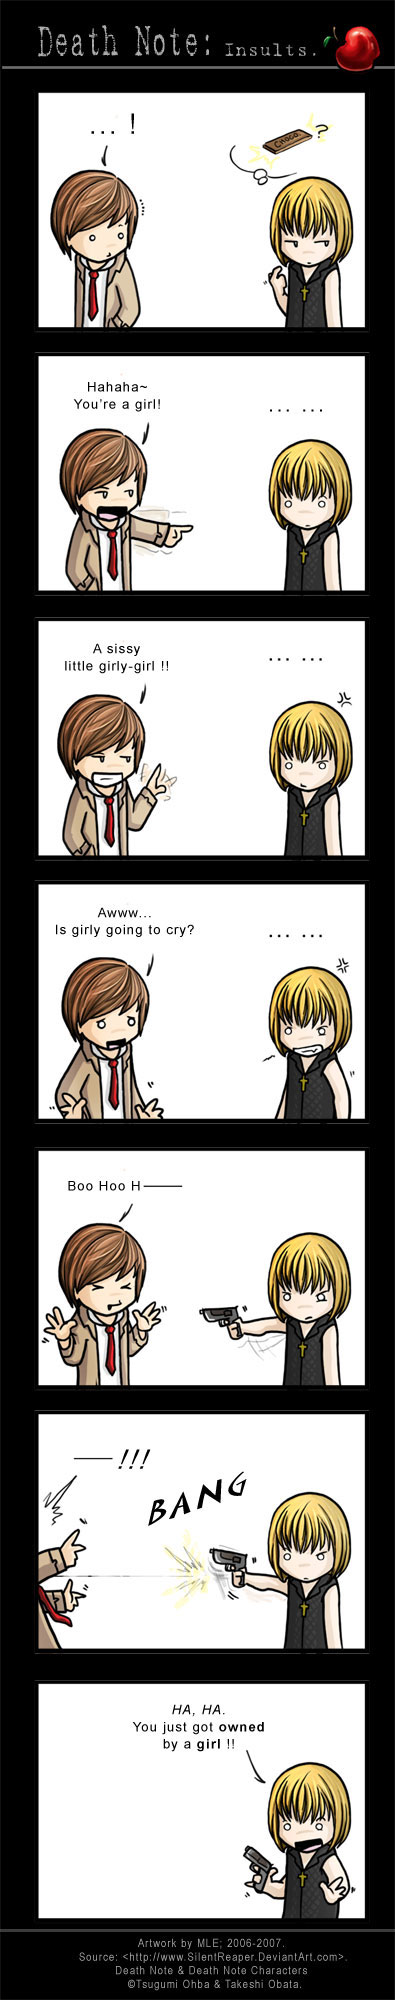 Death_Note__Insults_by_SilentReaper.jpg